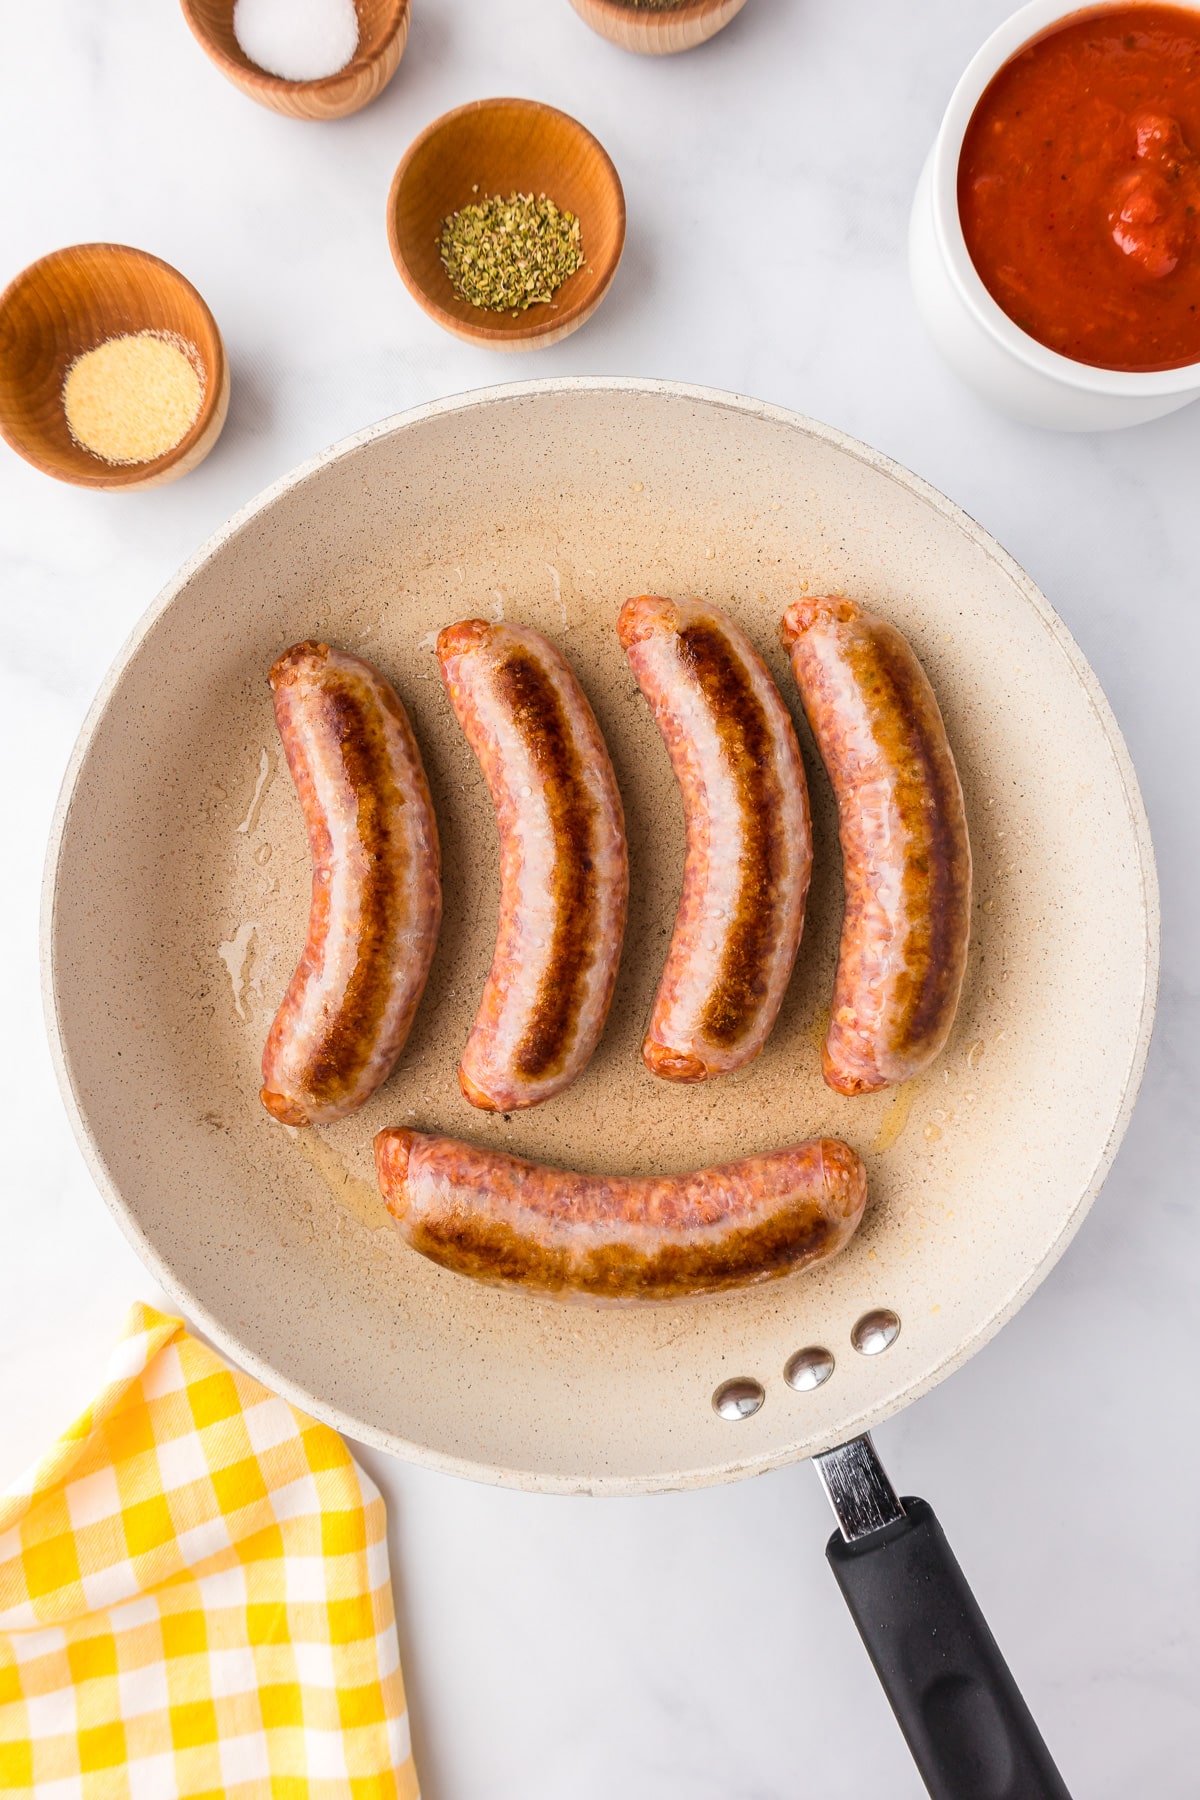 A group of Italian sausages browning in a pan.